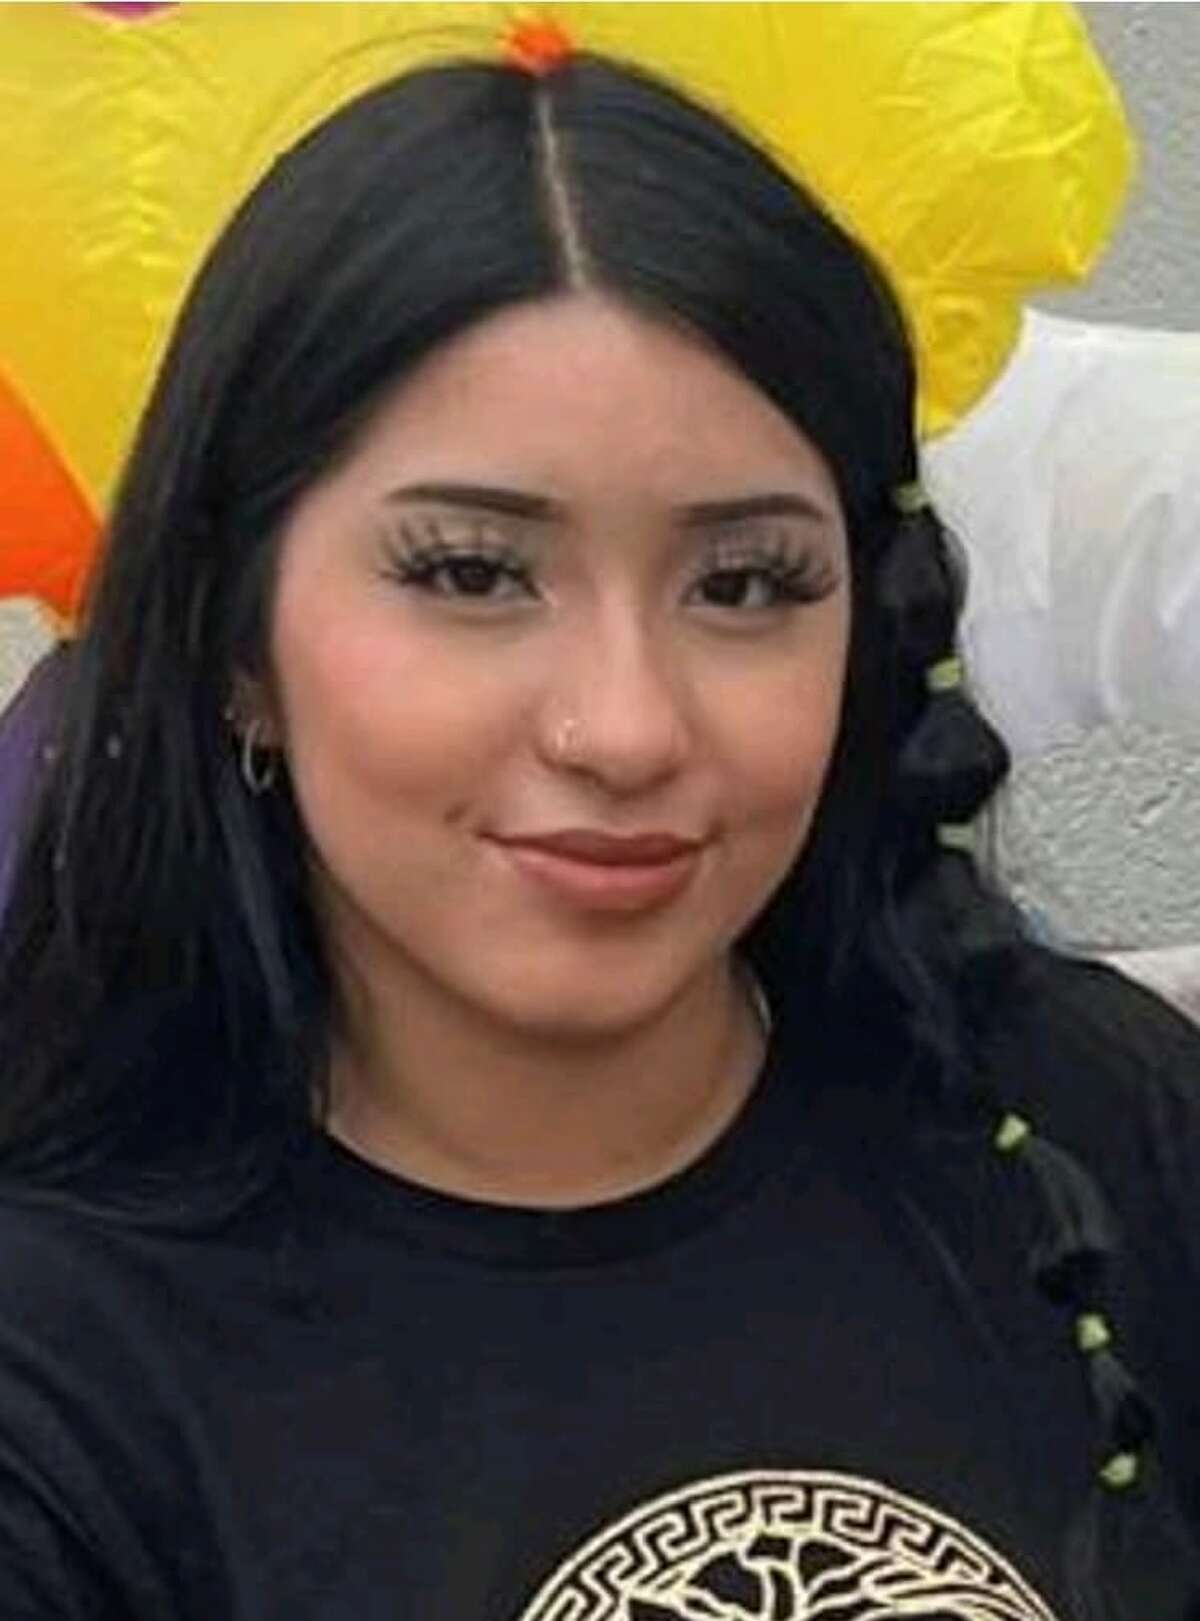 The Laredo Police Department announced on Wednesday, May 10, 2023 it is seeking a missing runaway teen in Devany Miranda Marin, age 15